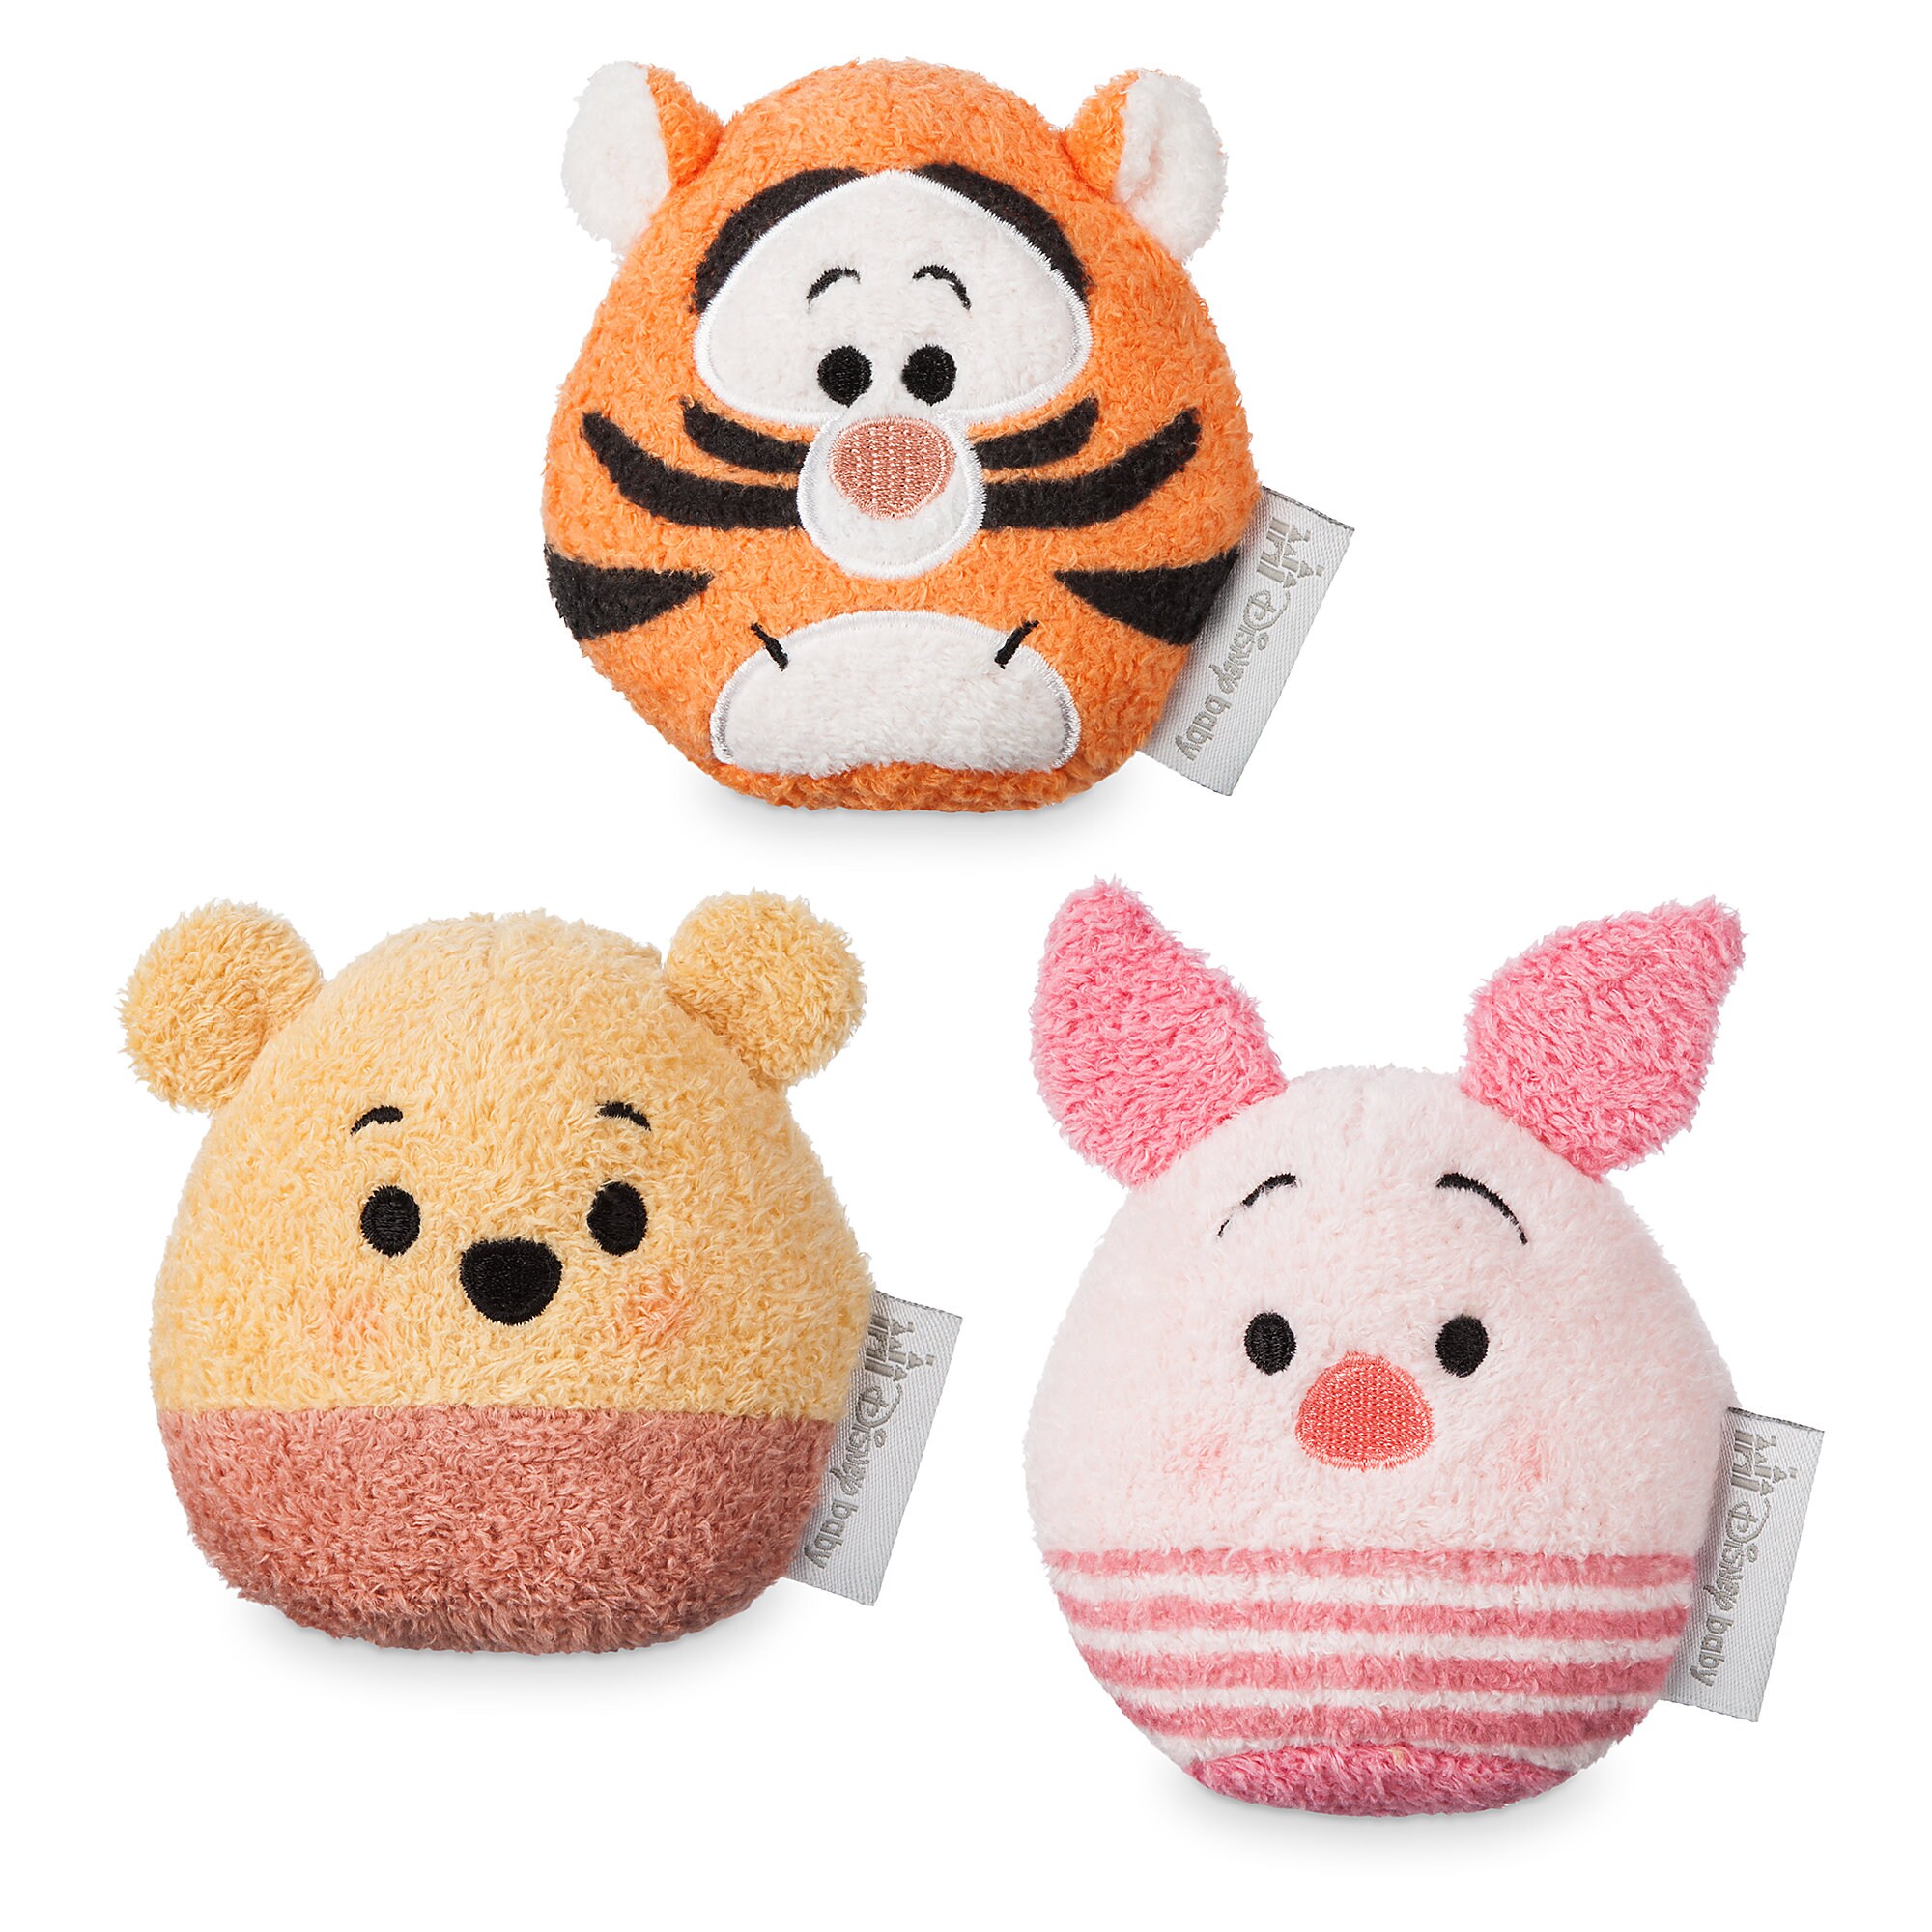 Winnie the Pooh Plush Toy Set for Baby